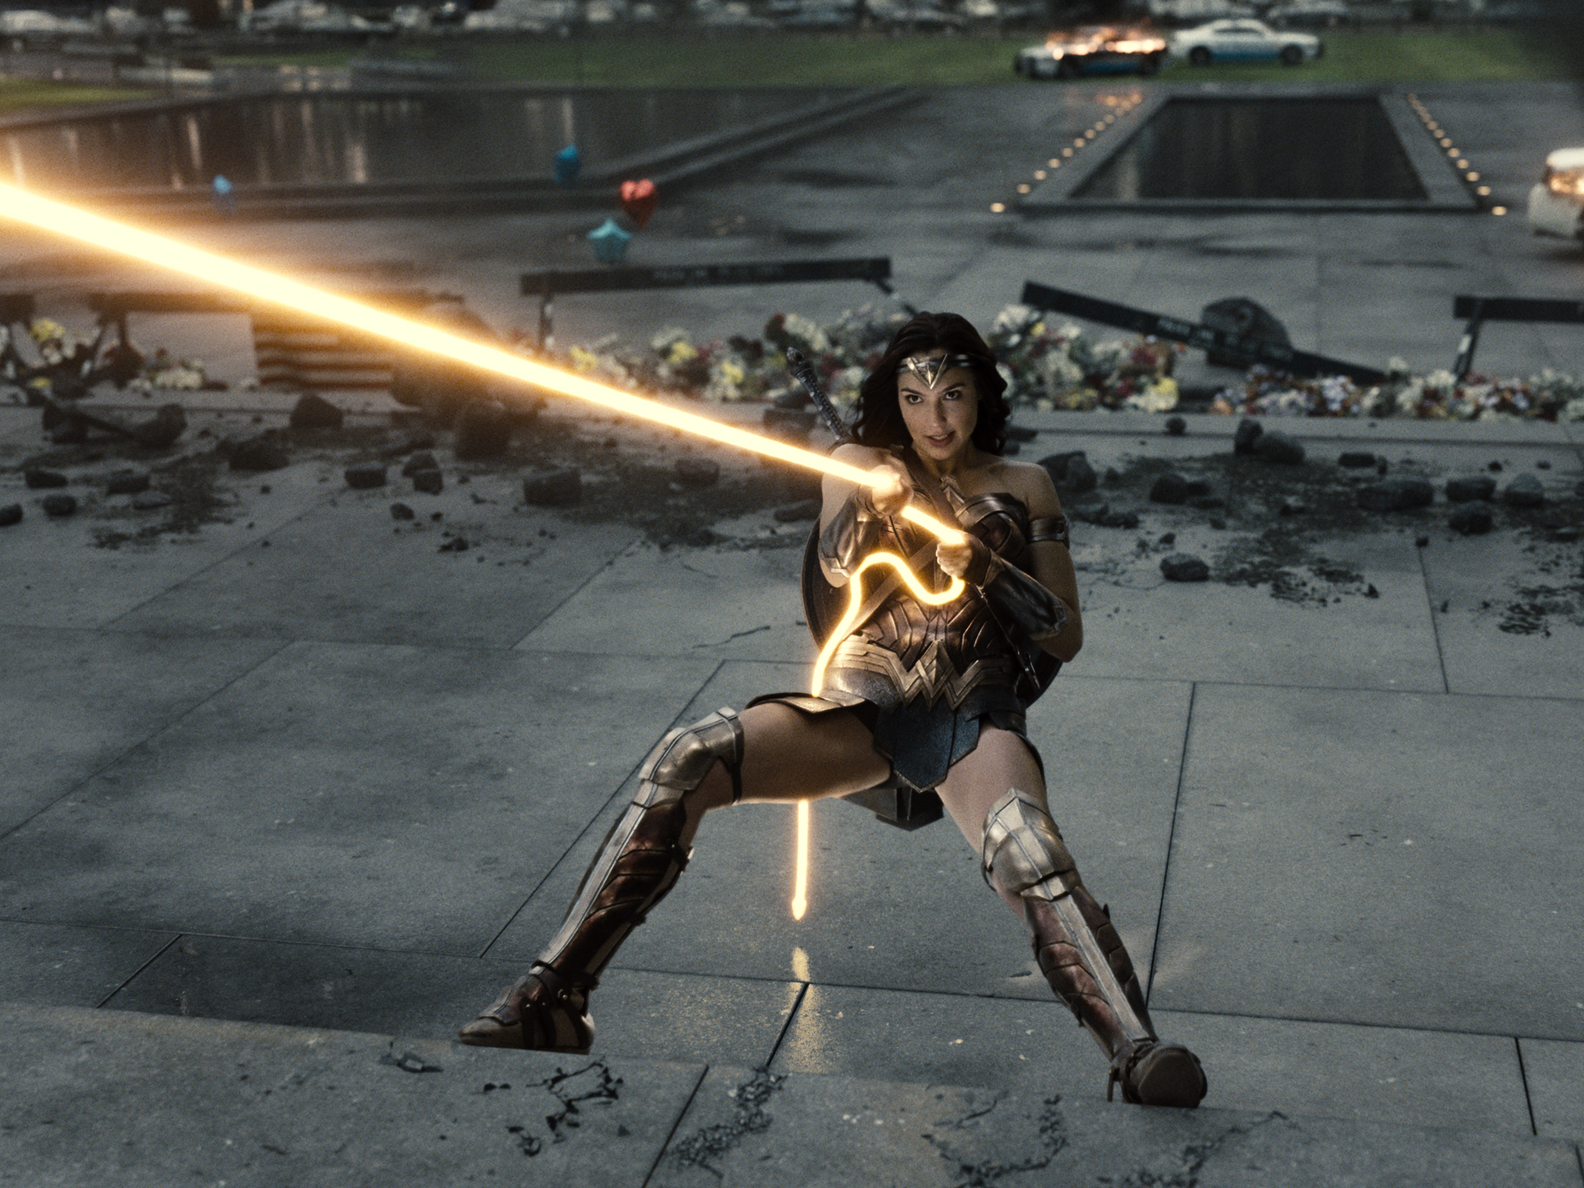 Gal Gadot (Diana Prince / Wonder Woman) in Zack Snyder's Justice League